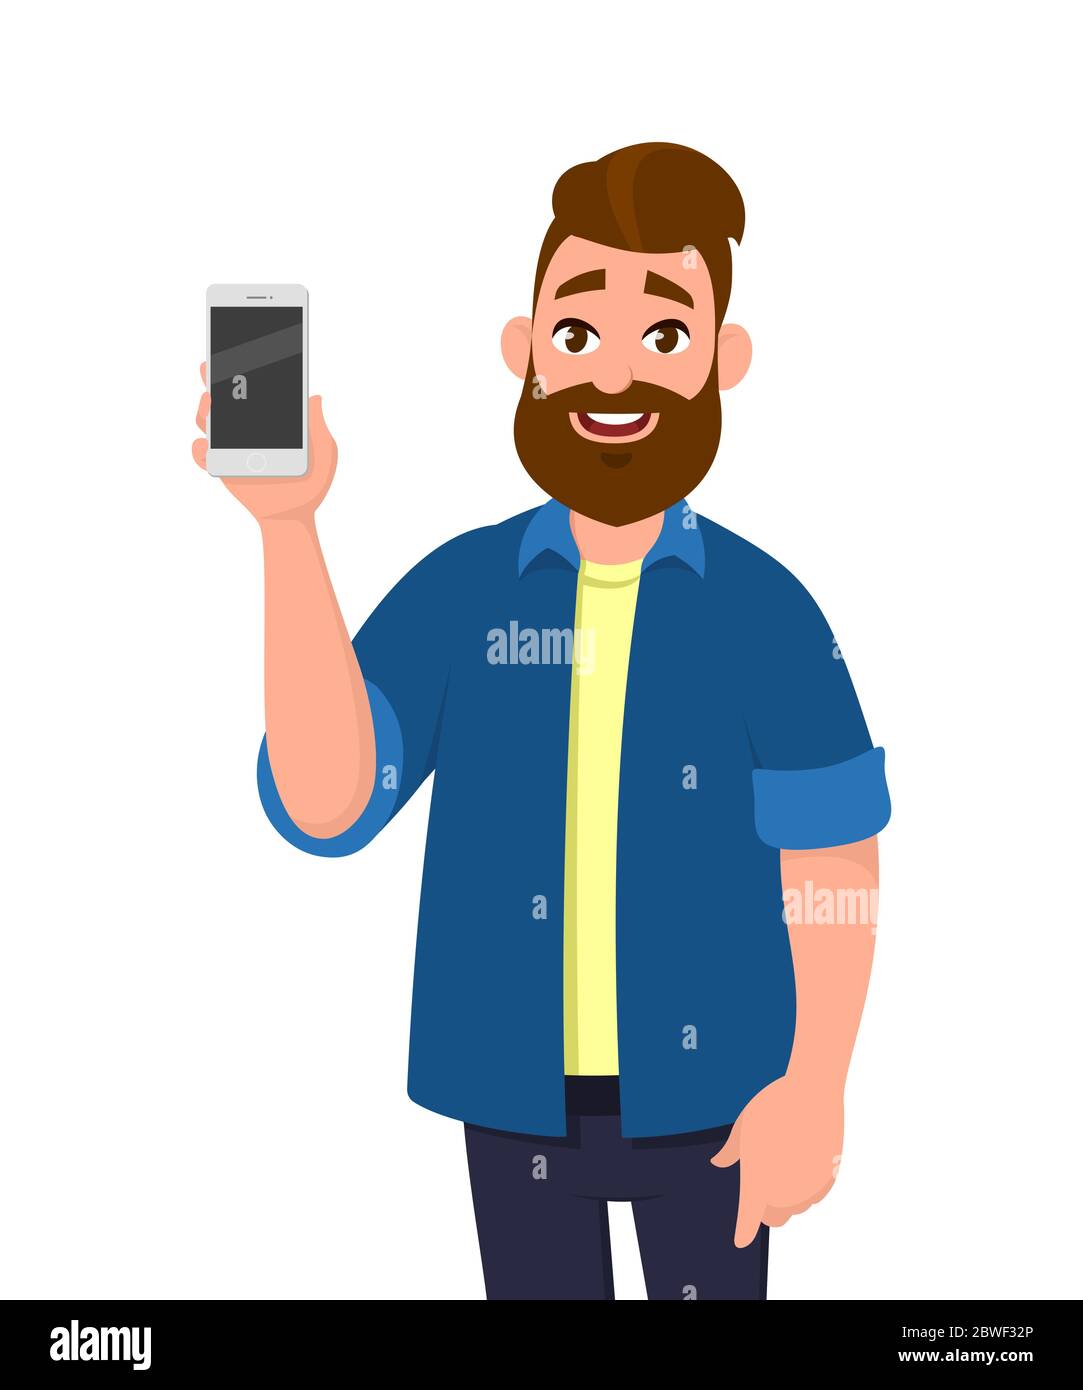 Cartoon Mobile Phone Character T Pose Stock Illustrations – 27